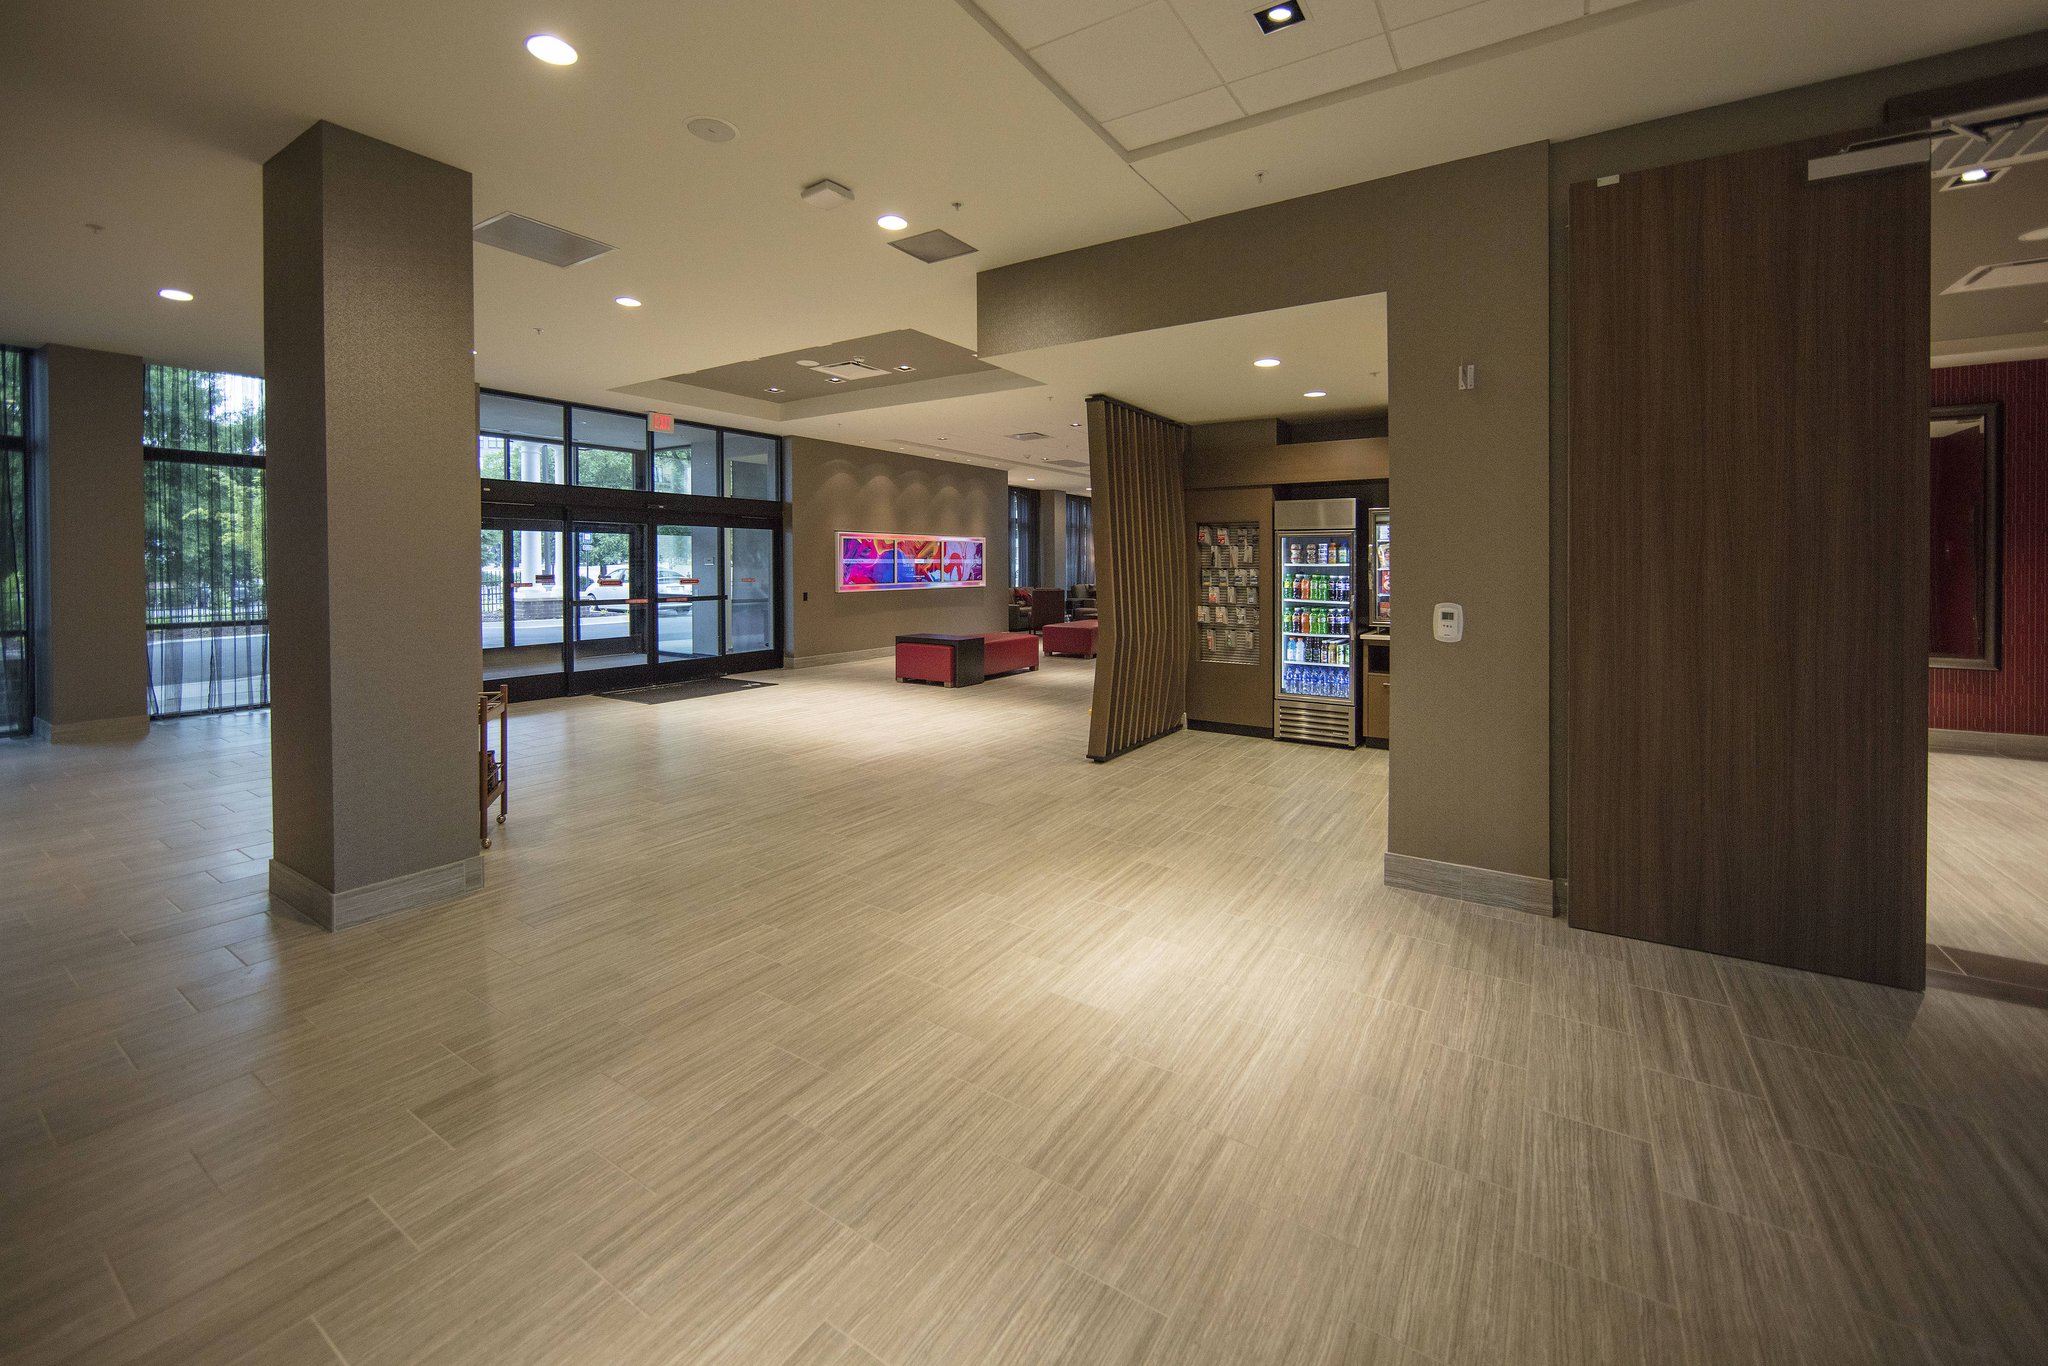 Springhill Suites Athens Downtownuniversity Area